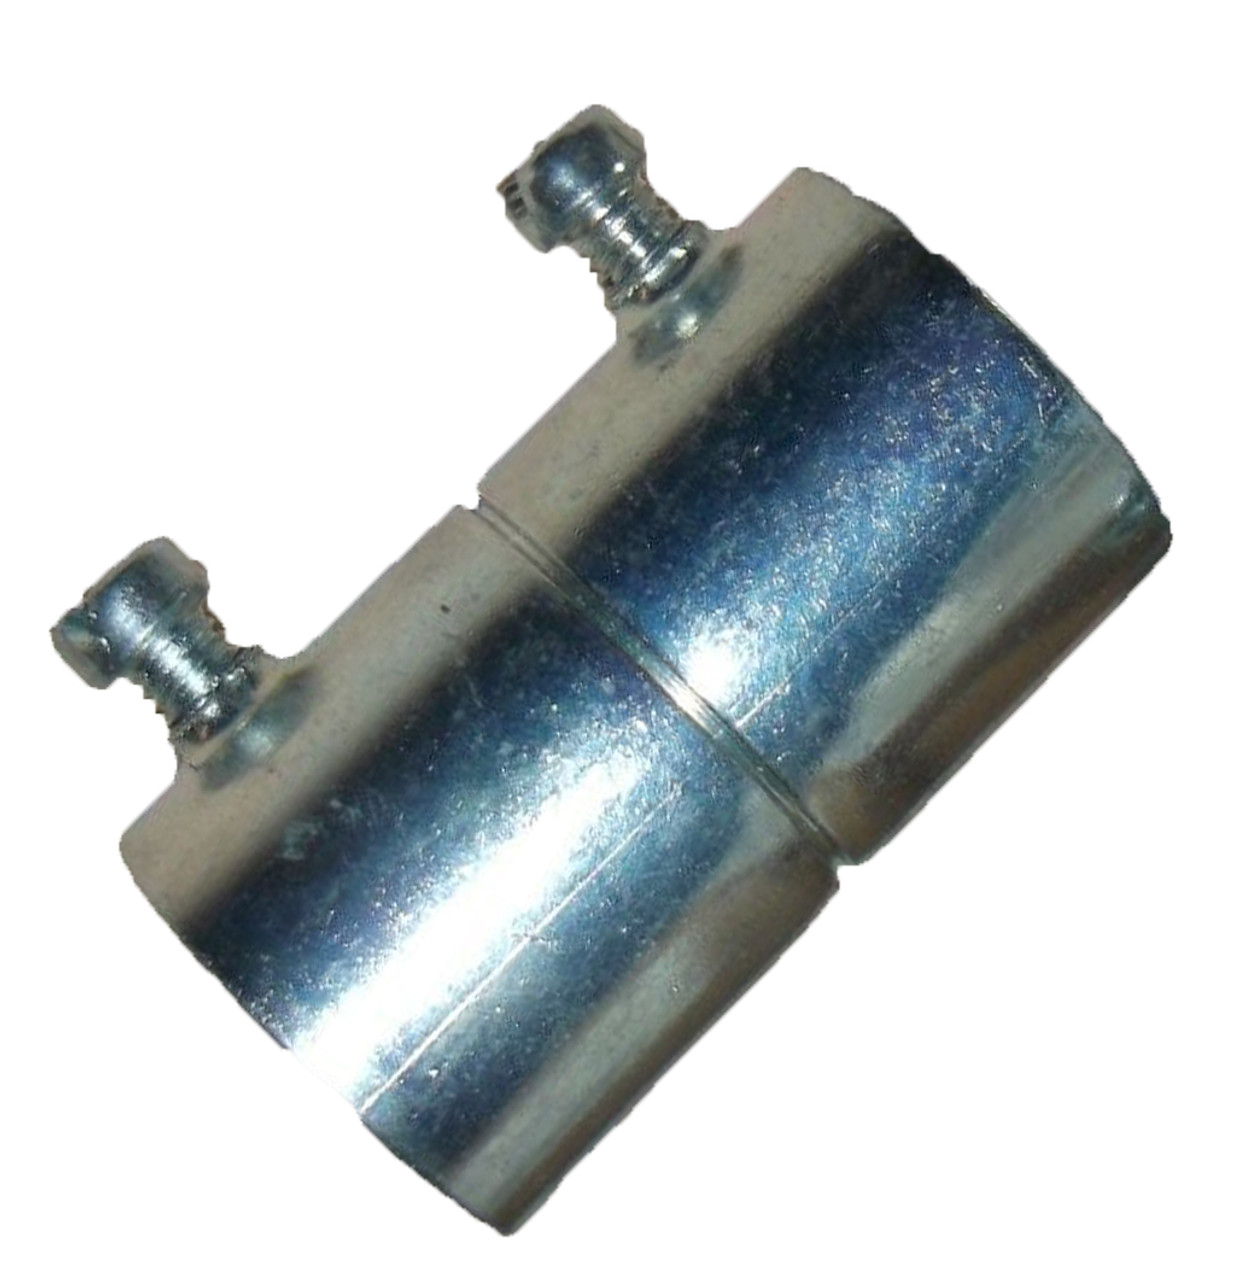 Appleton 5075S Coupling Material: Steel Size: 3/4 Inch Set Screw, for use with Steel EMT